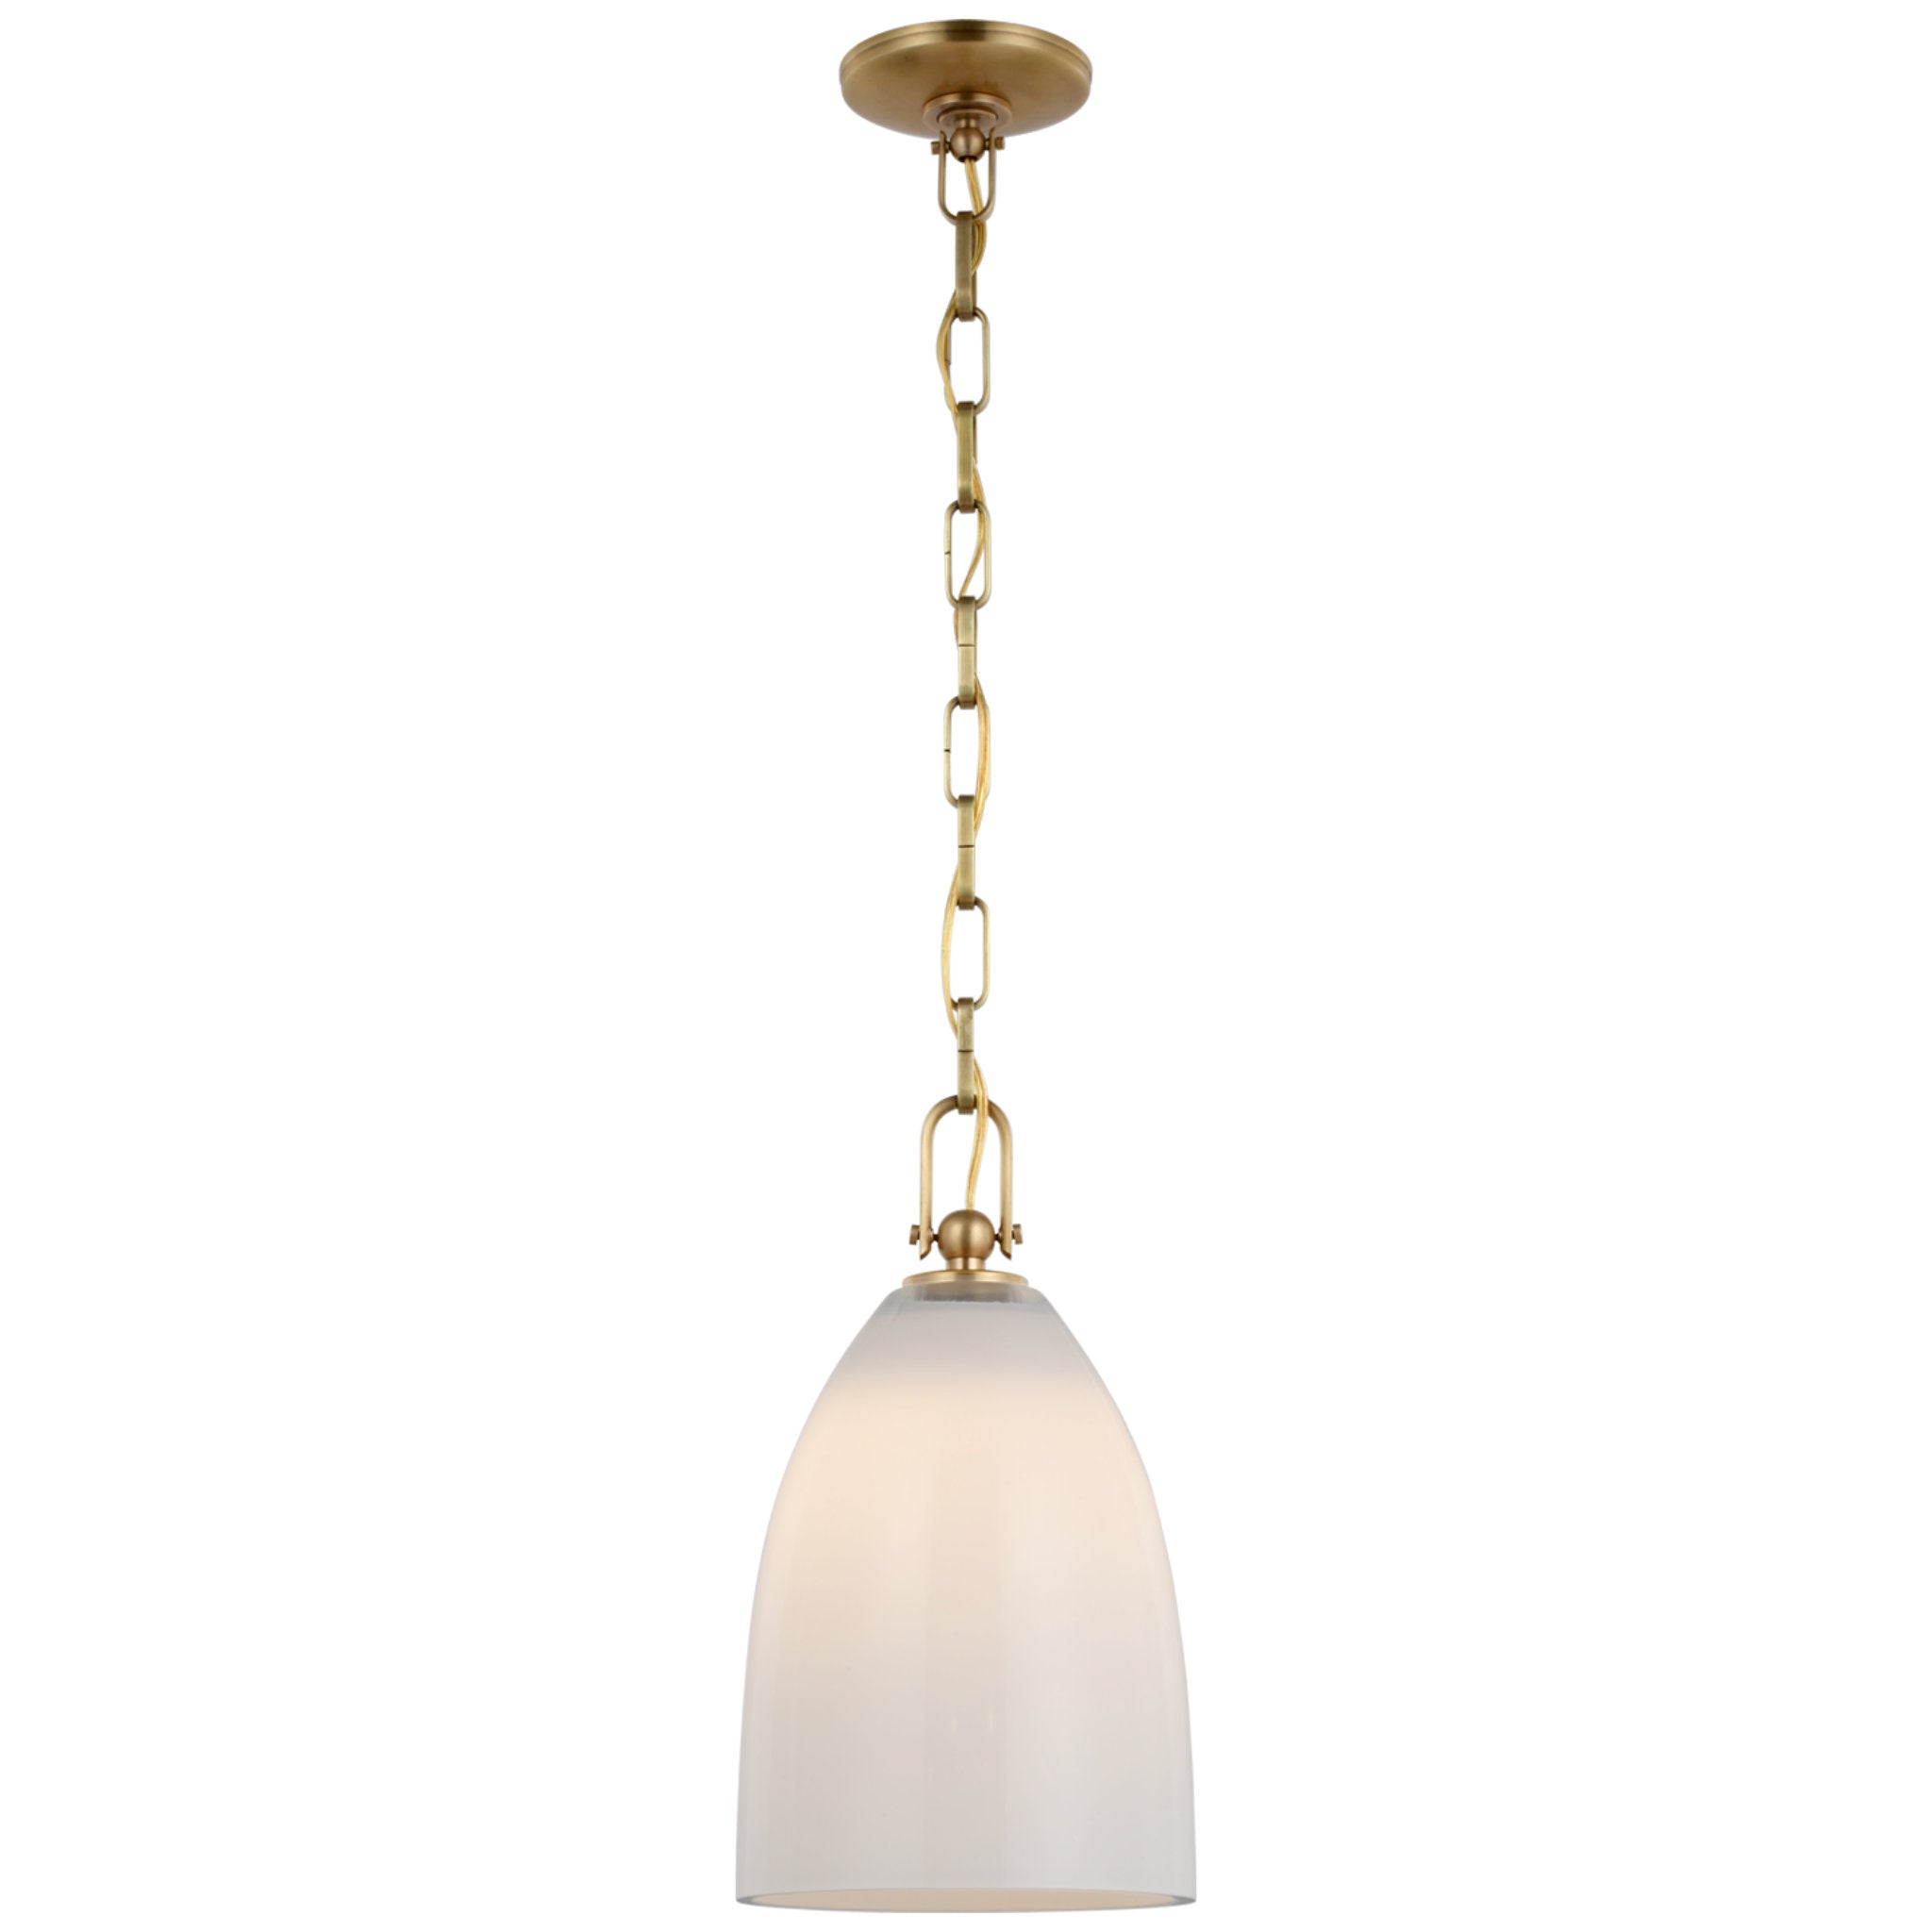 Chapman & Myers Andros Medium Pendant in Antique-Burnished Brass with White Glass